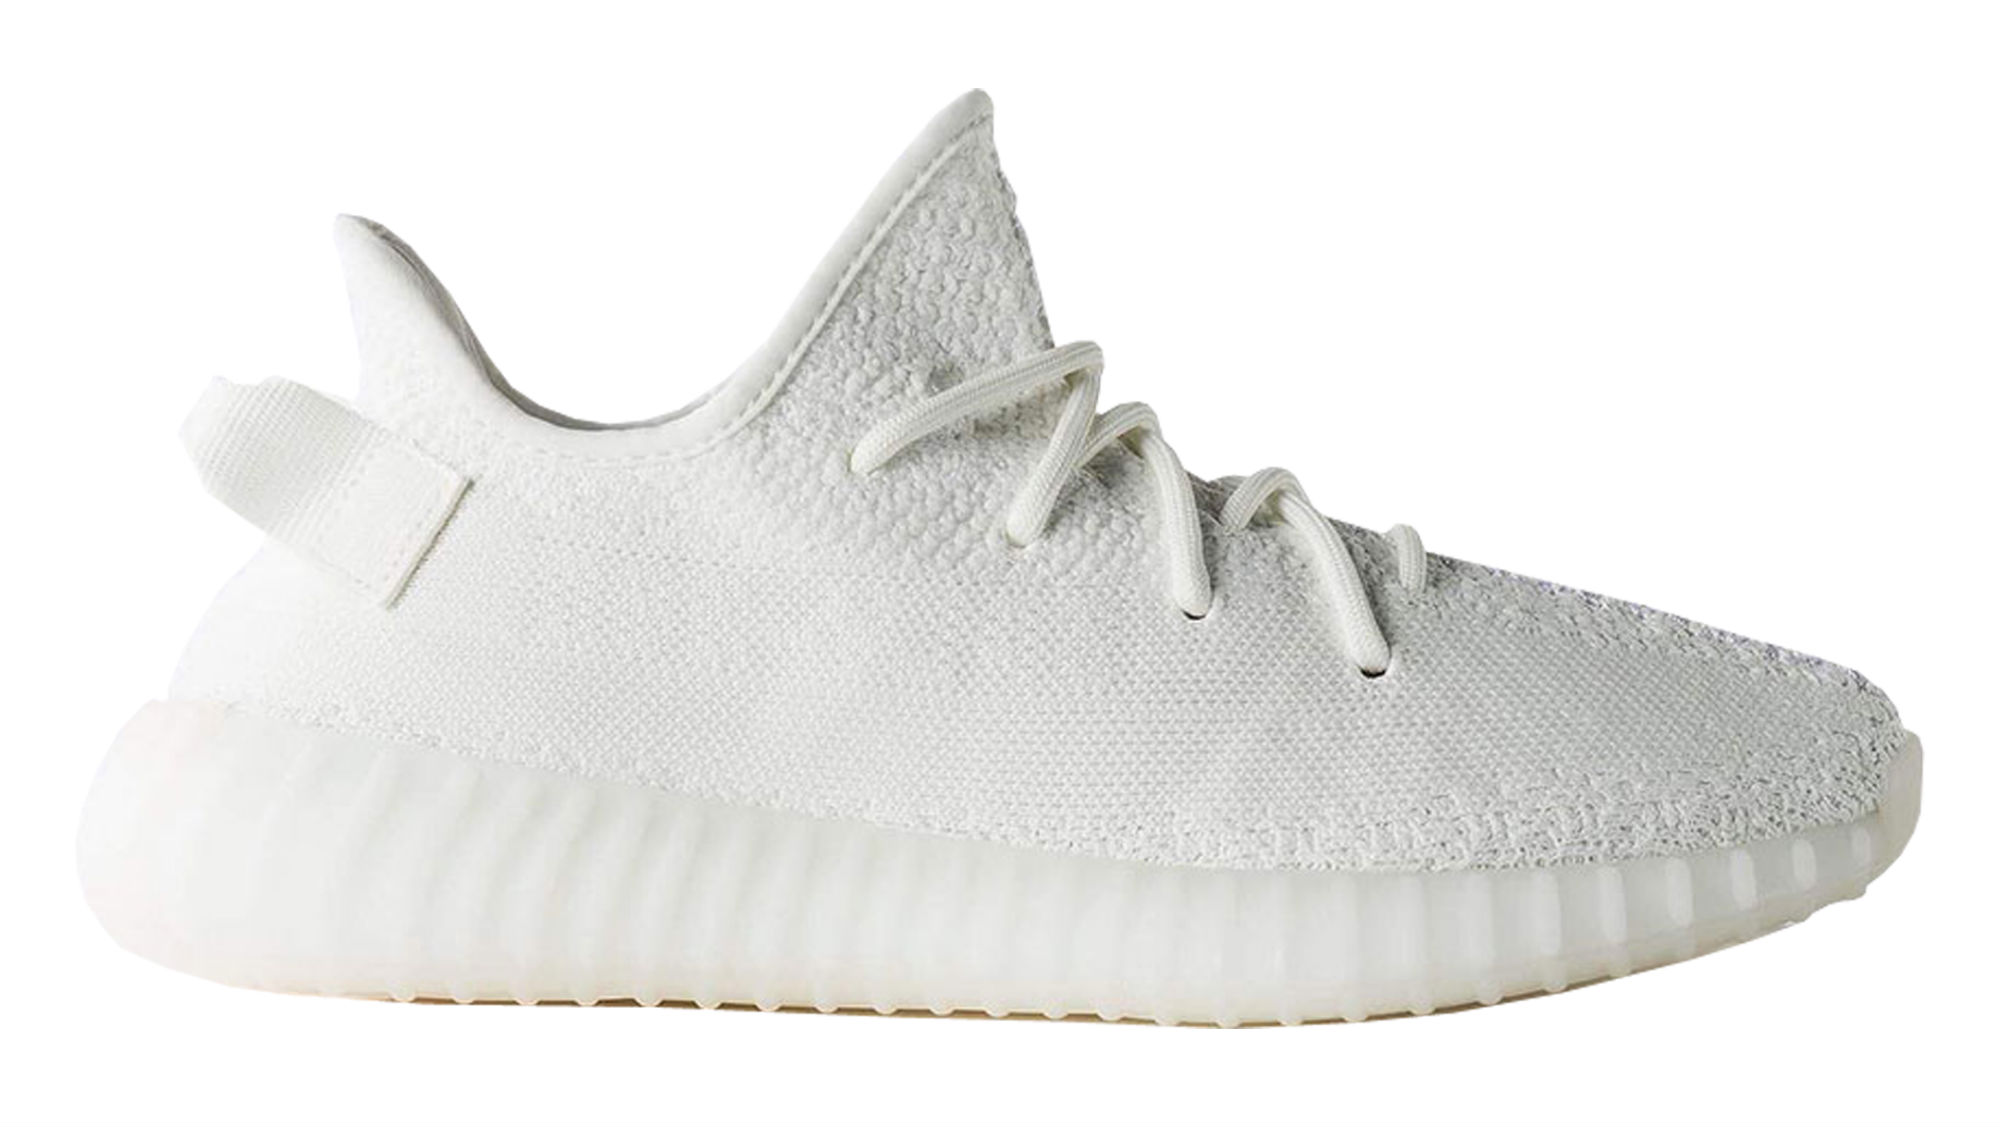 Adidas Yeezy Boost 350 V2 Cream White Release Date CP9366